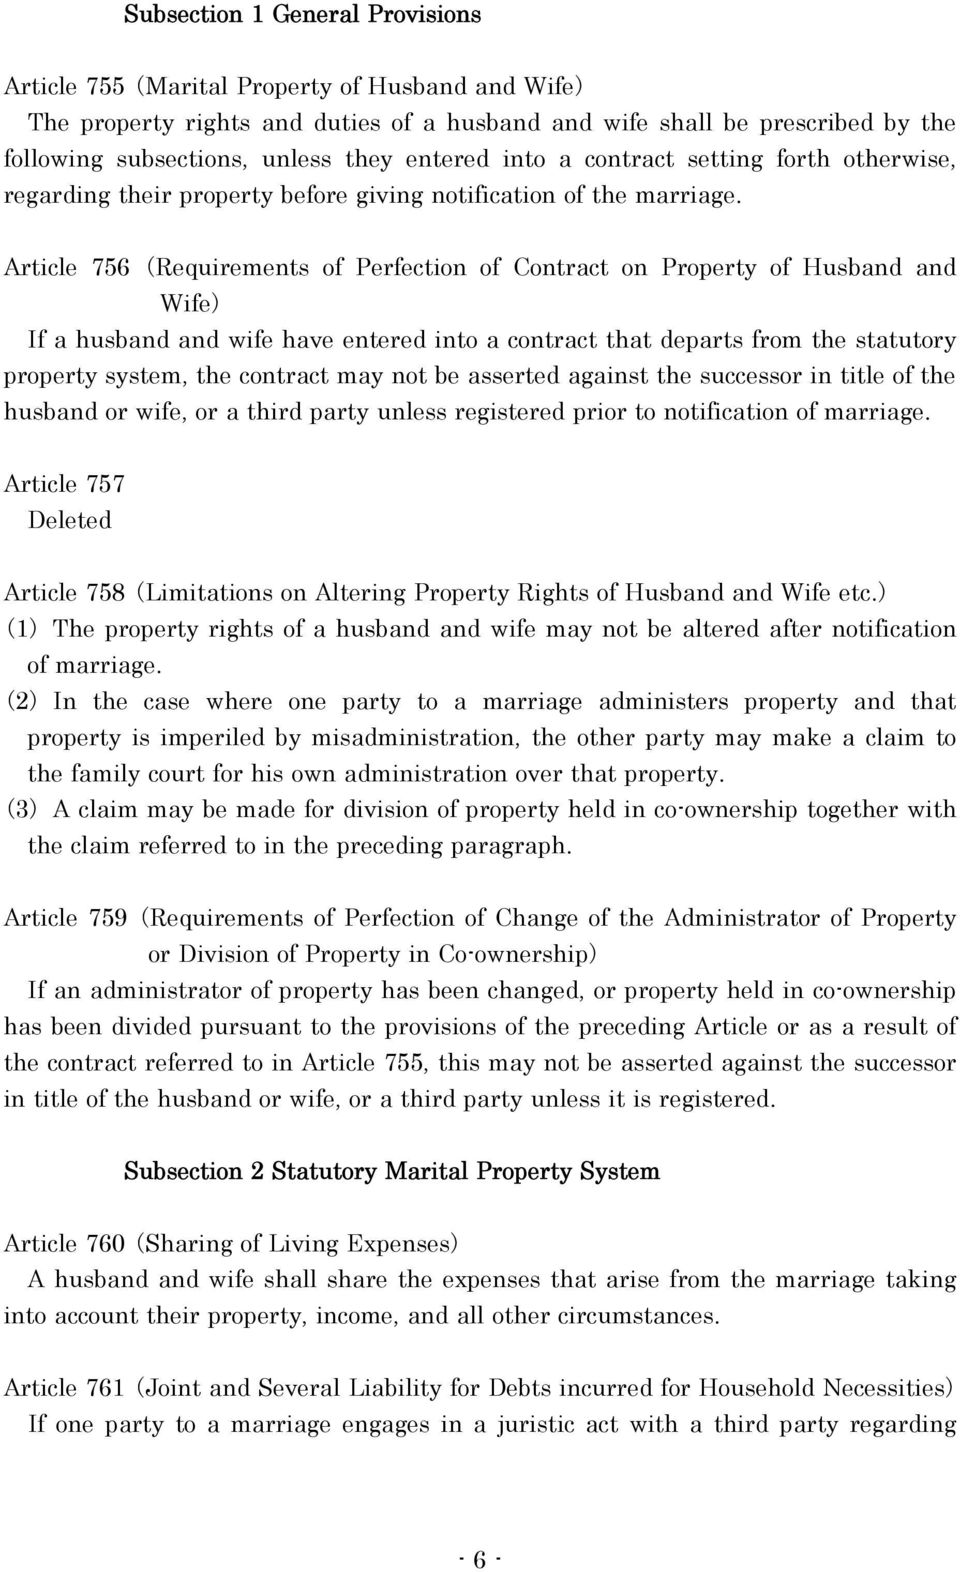 Article 756 ( Requirements of Perfection of Contract on Property of Husband and Wife) If a husband and wife have entered into a contract that departs from the statutory property system, the contract